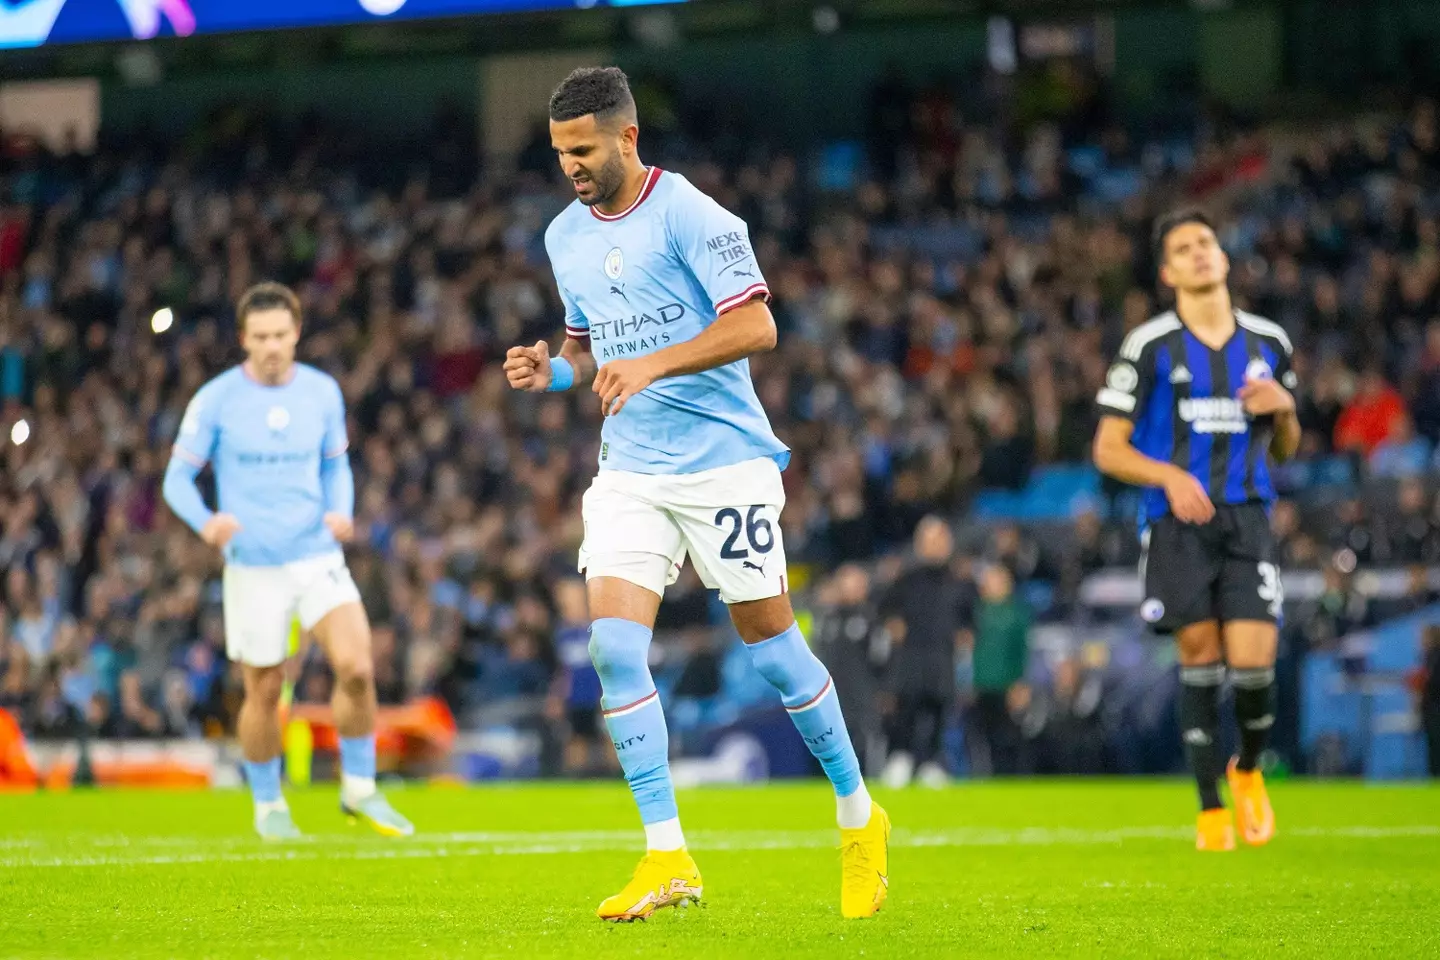 Riyad Mahrez in action for Manchester City.